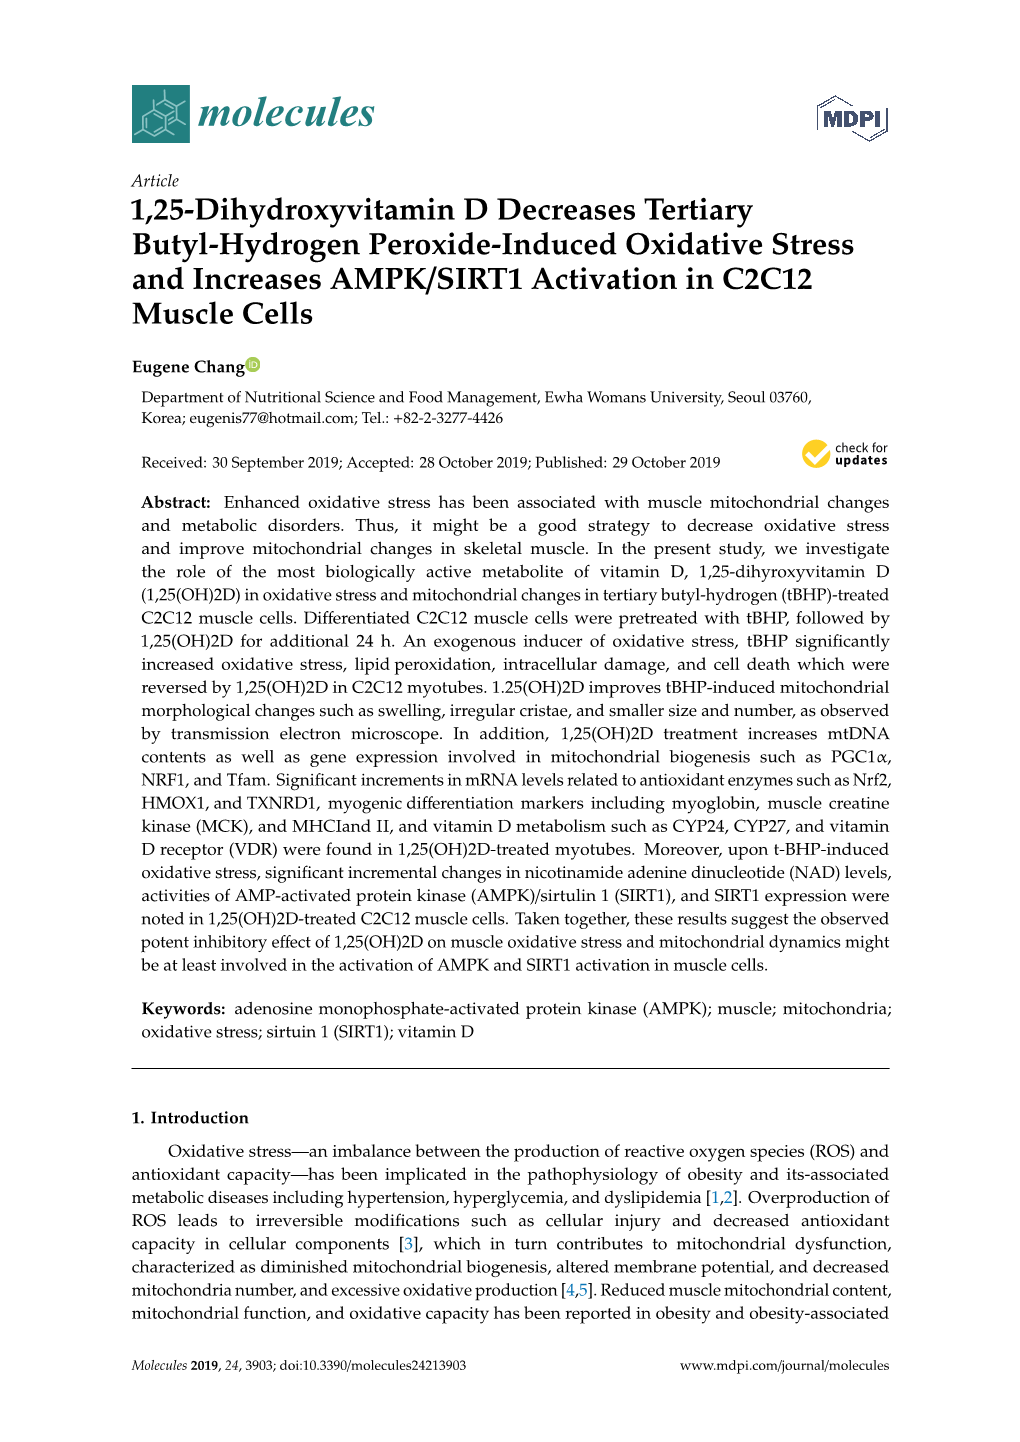 1, 25-Dihydroxyvitamin D Decreases Tertiary Butyl-Hydrogen Peroxide-Induced Oxidative Stress and Increases AMPK/SIRT1 Activation in C2C12 Muscle Cells